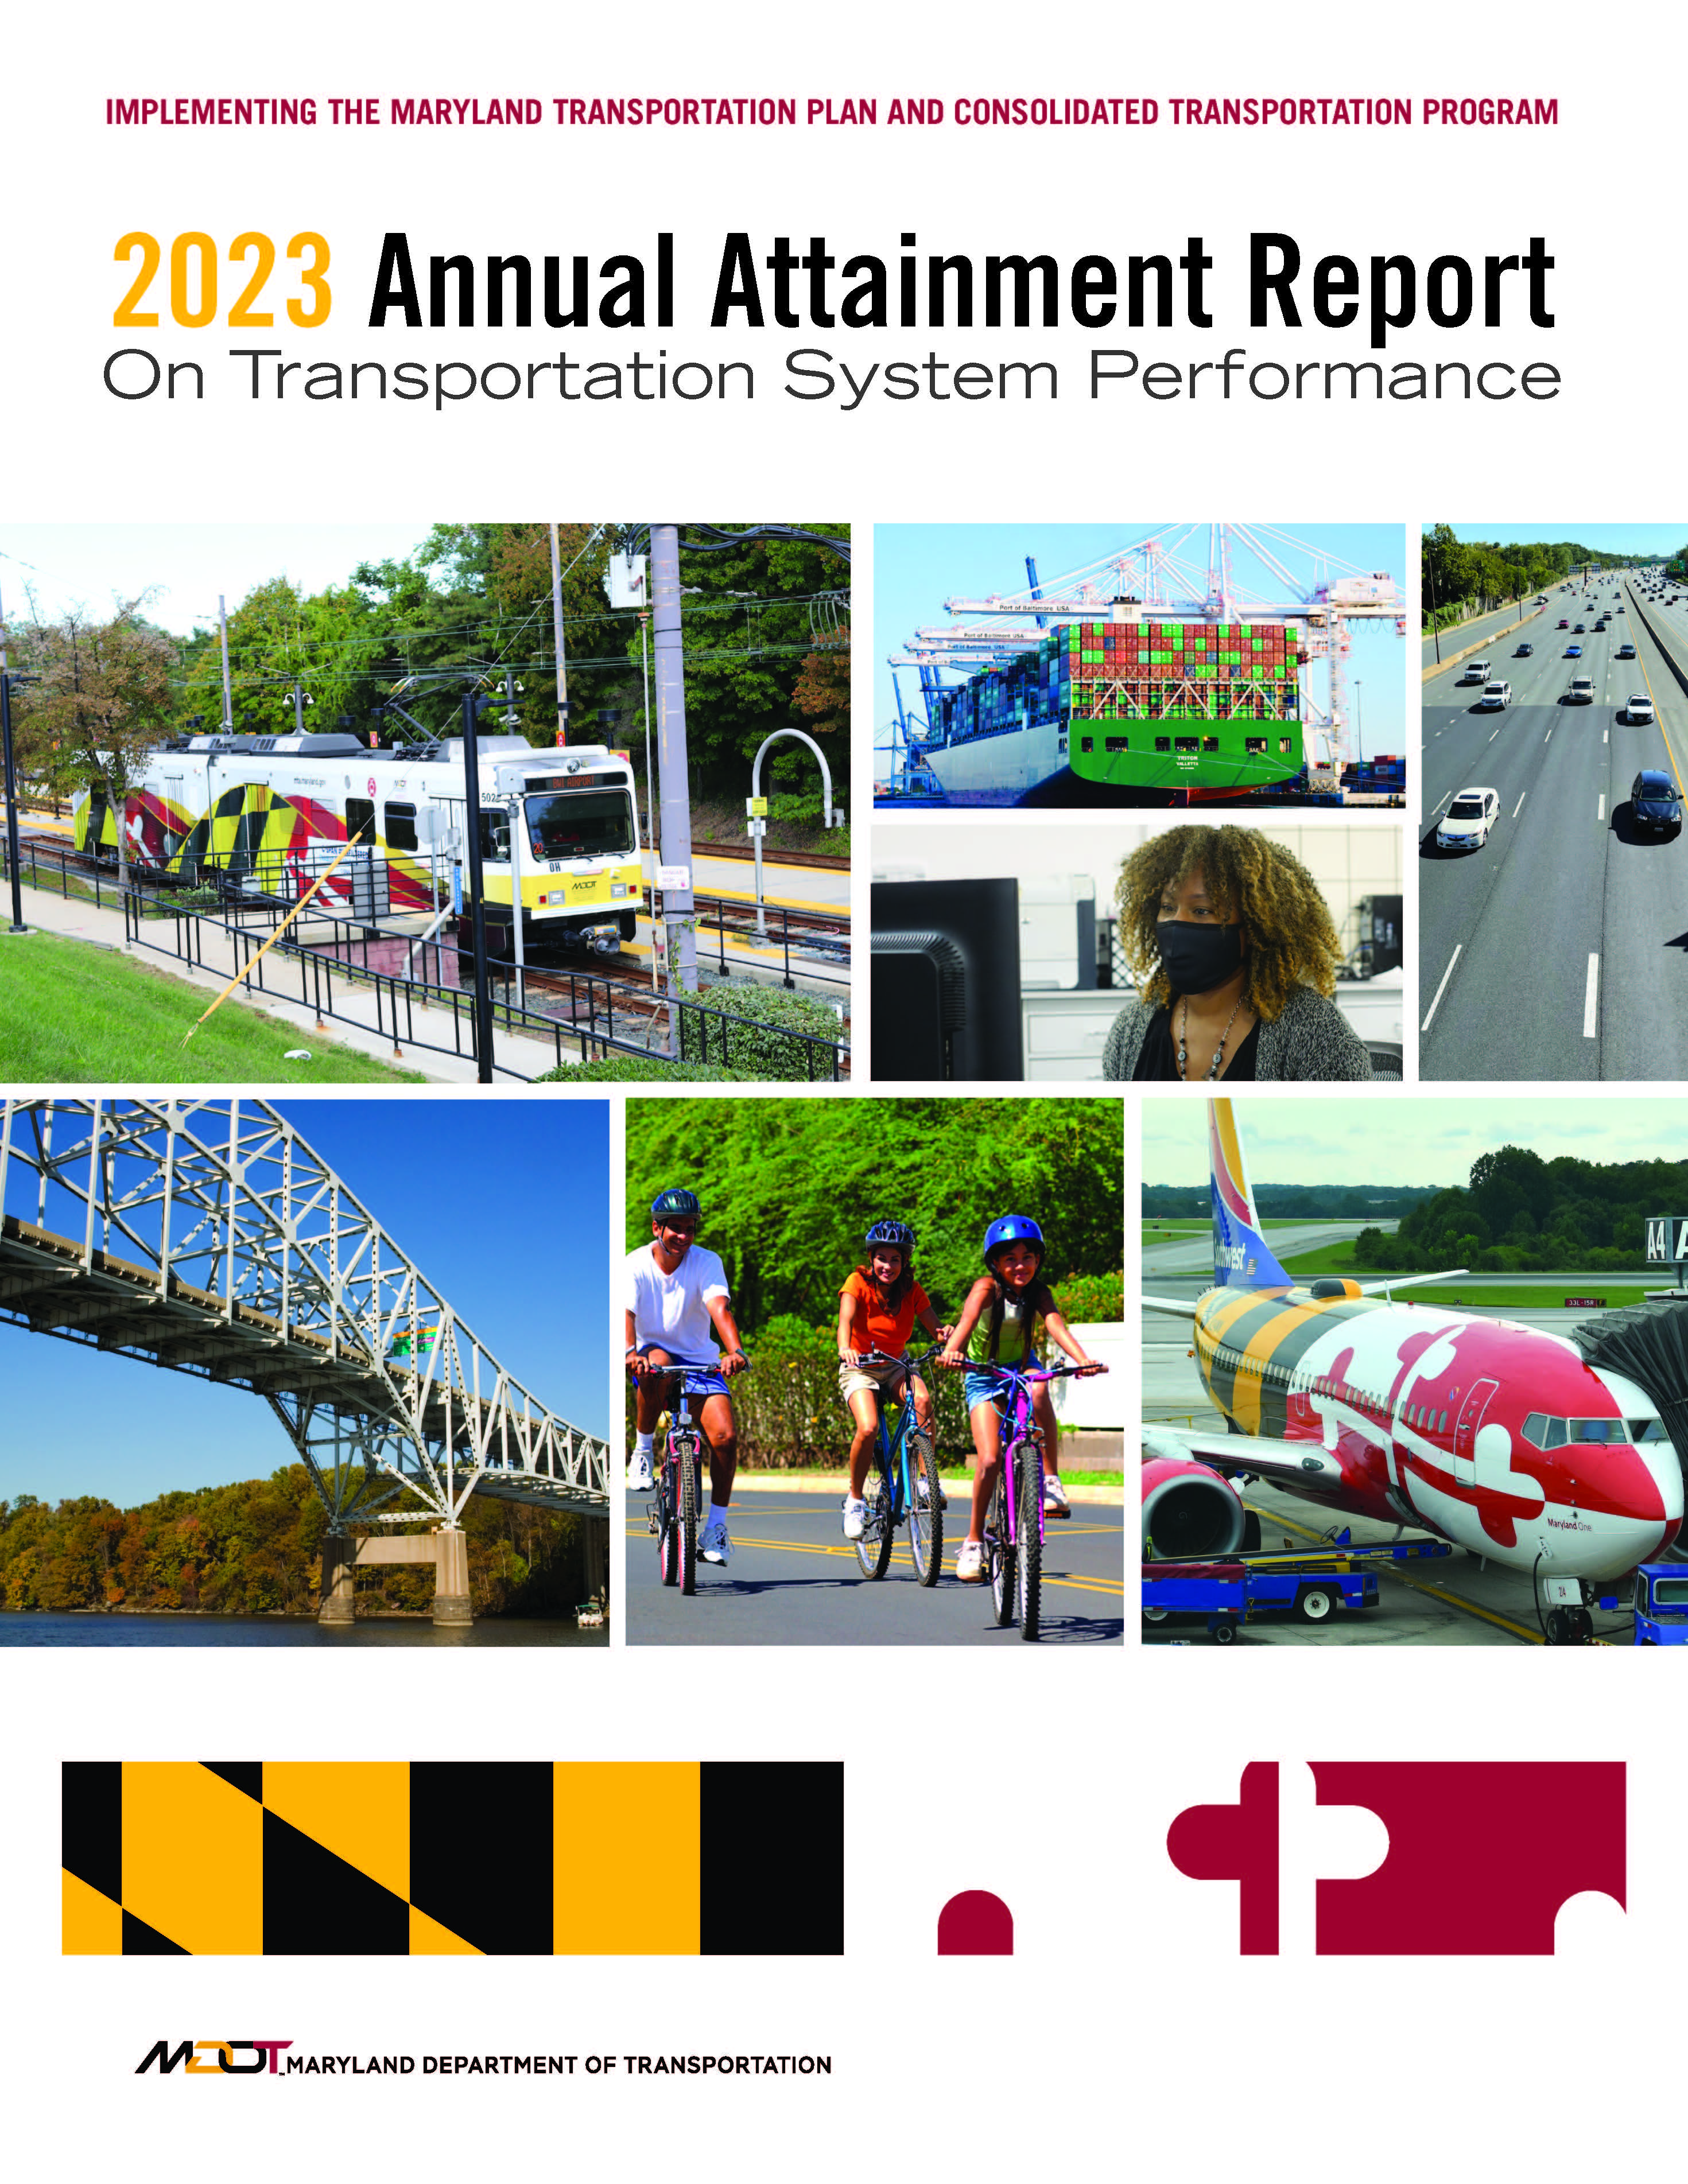 The cover of the 2023 Attainment Report